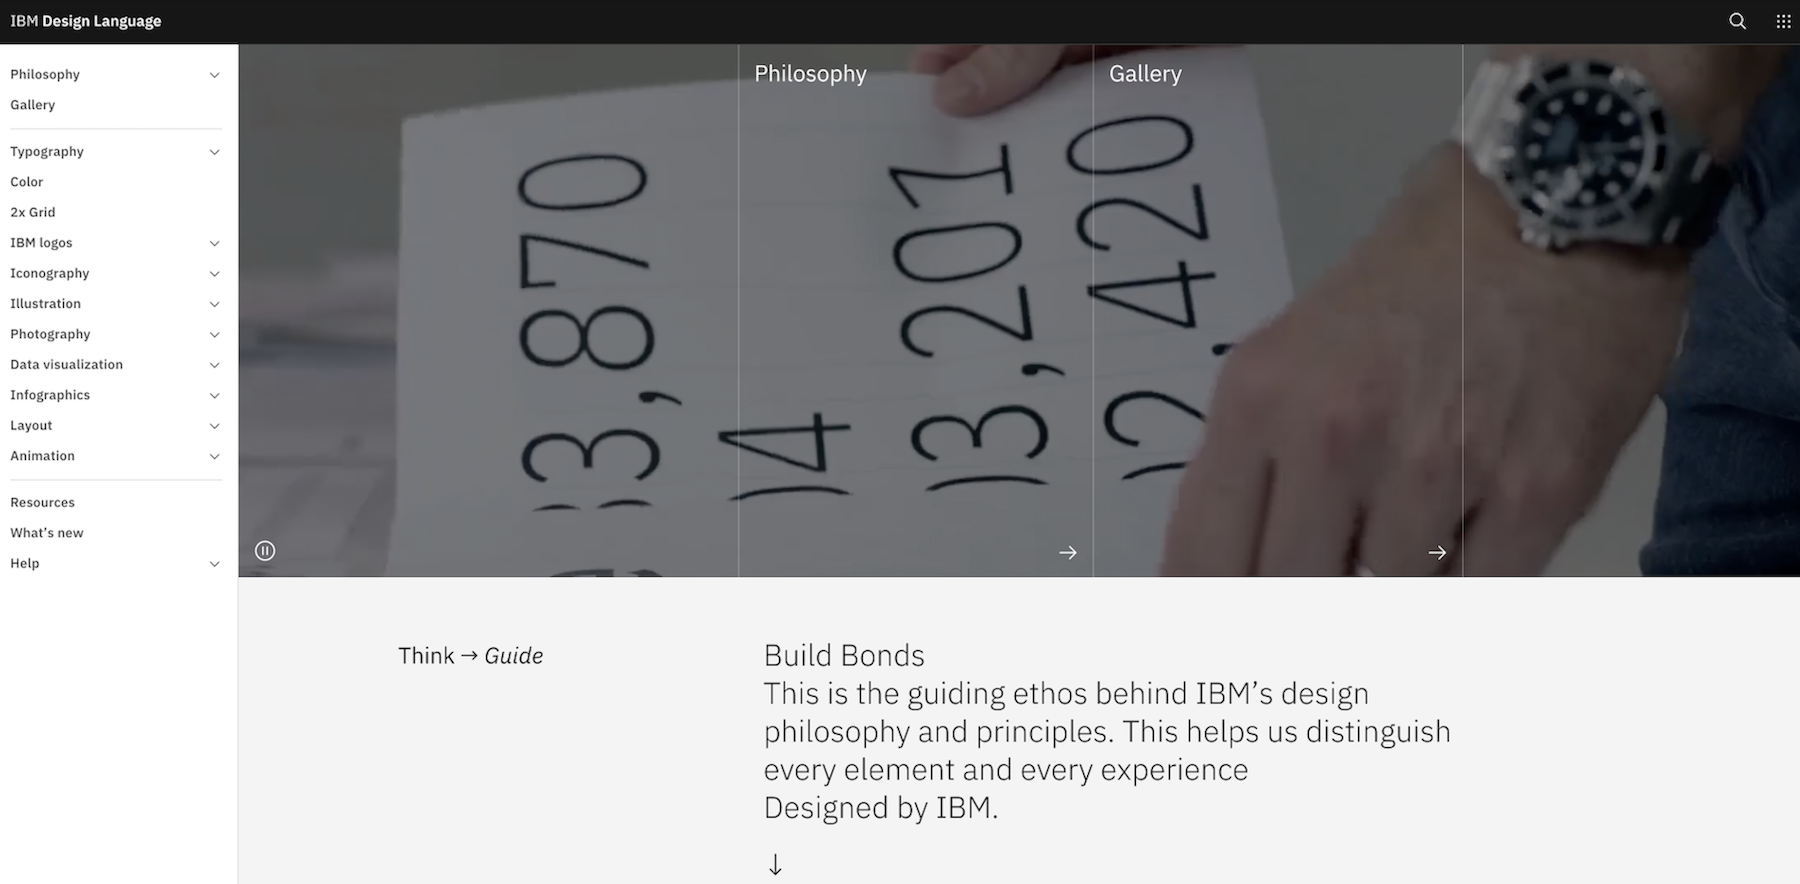 IBM design system presents information on what new products and services of the brand should look like.